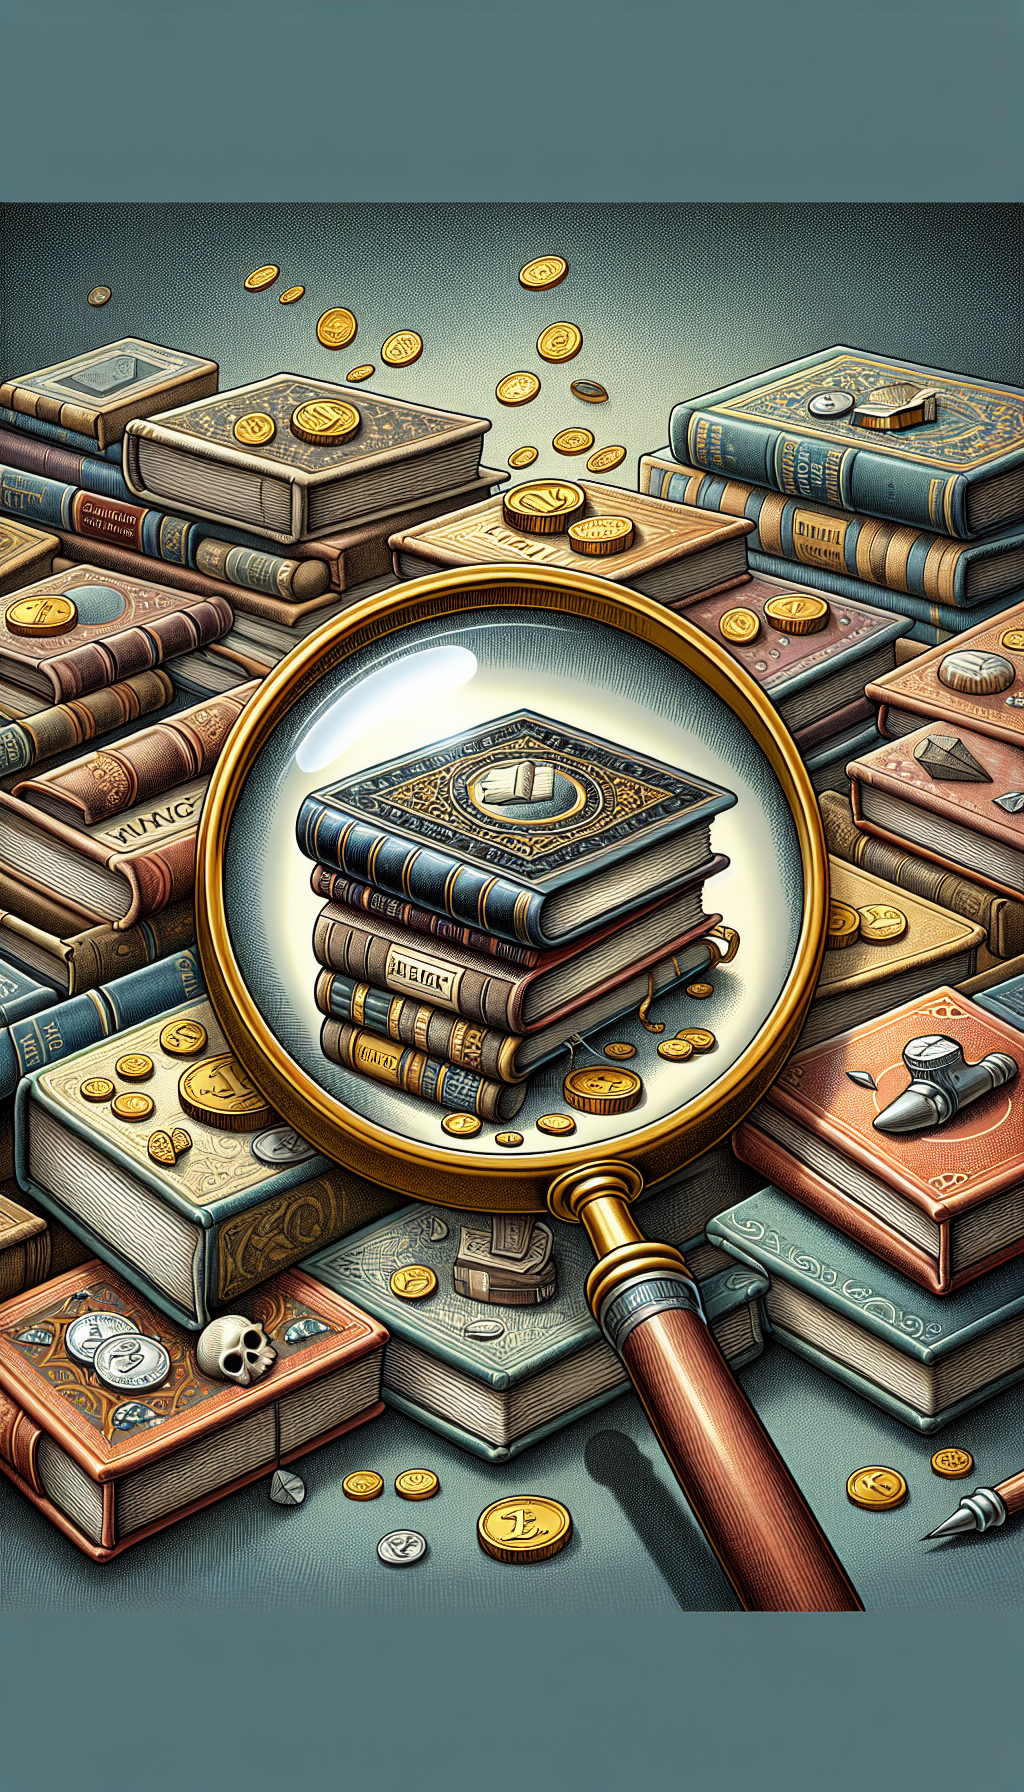 An illustration depicts a magnifying glass highlighting a book spine amongst a stack of ancient tomes, where each book's title is a tip for valuation (e.g., "First Editions," "Signatures," "Rarity"). Intermixed within the pile, symbols of value such as small gold coins and gems subtly emerge from the pages, blending the traditional treasure hunt with the hunt for valuable old books.